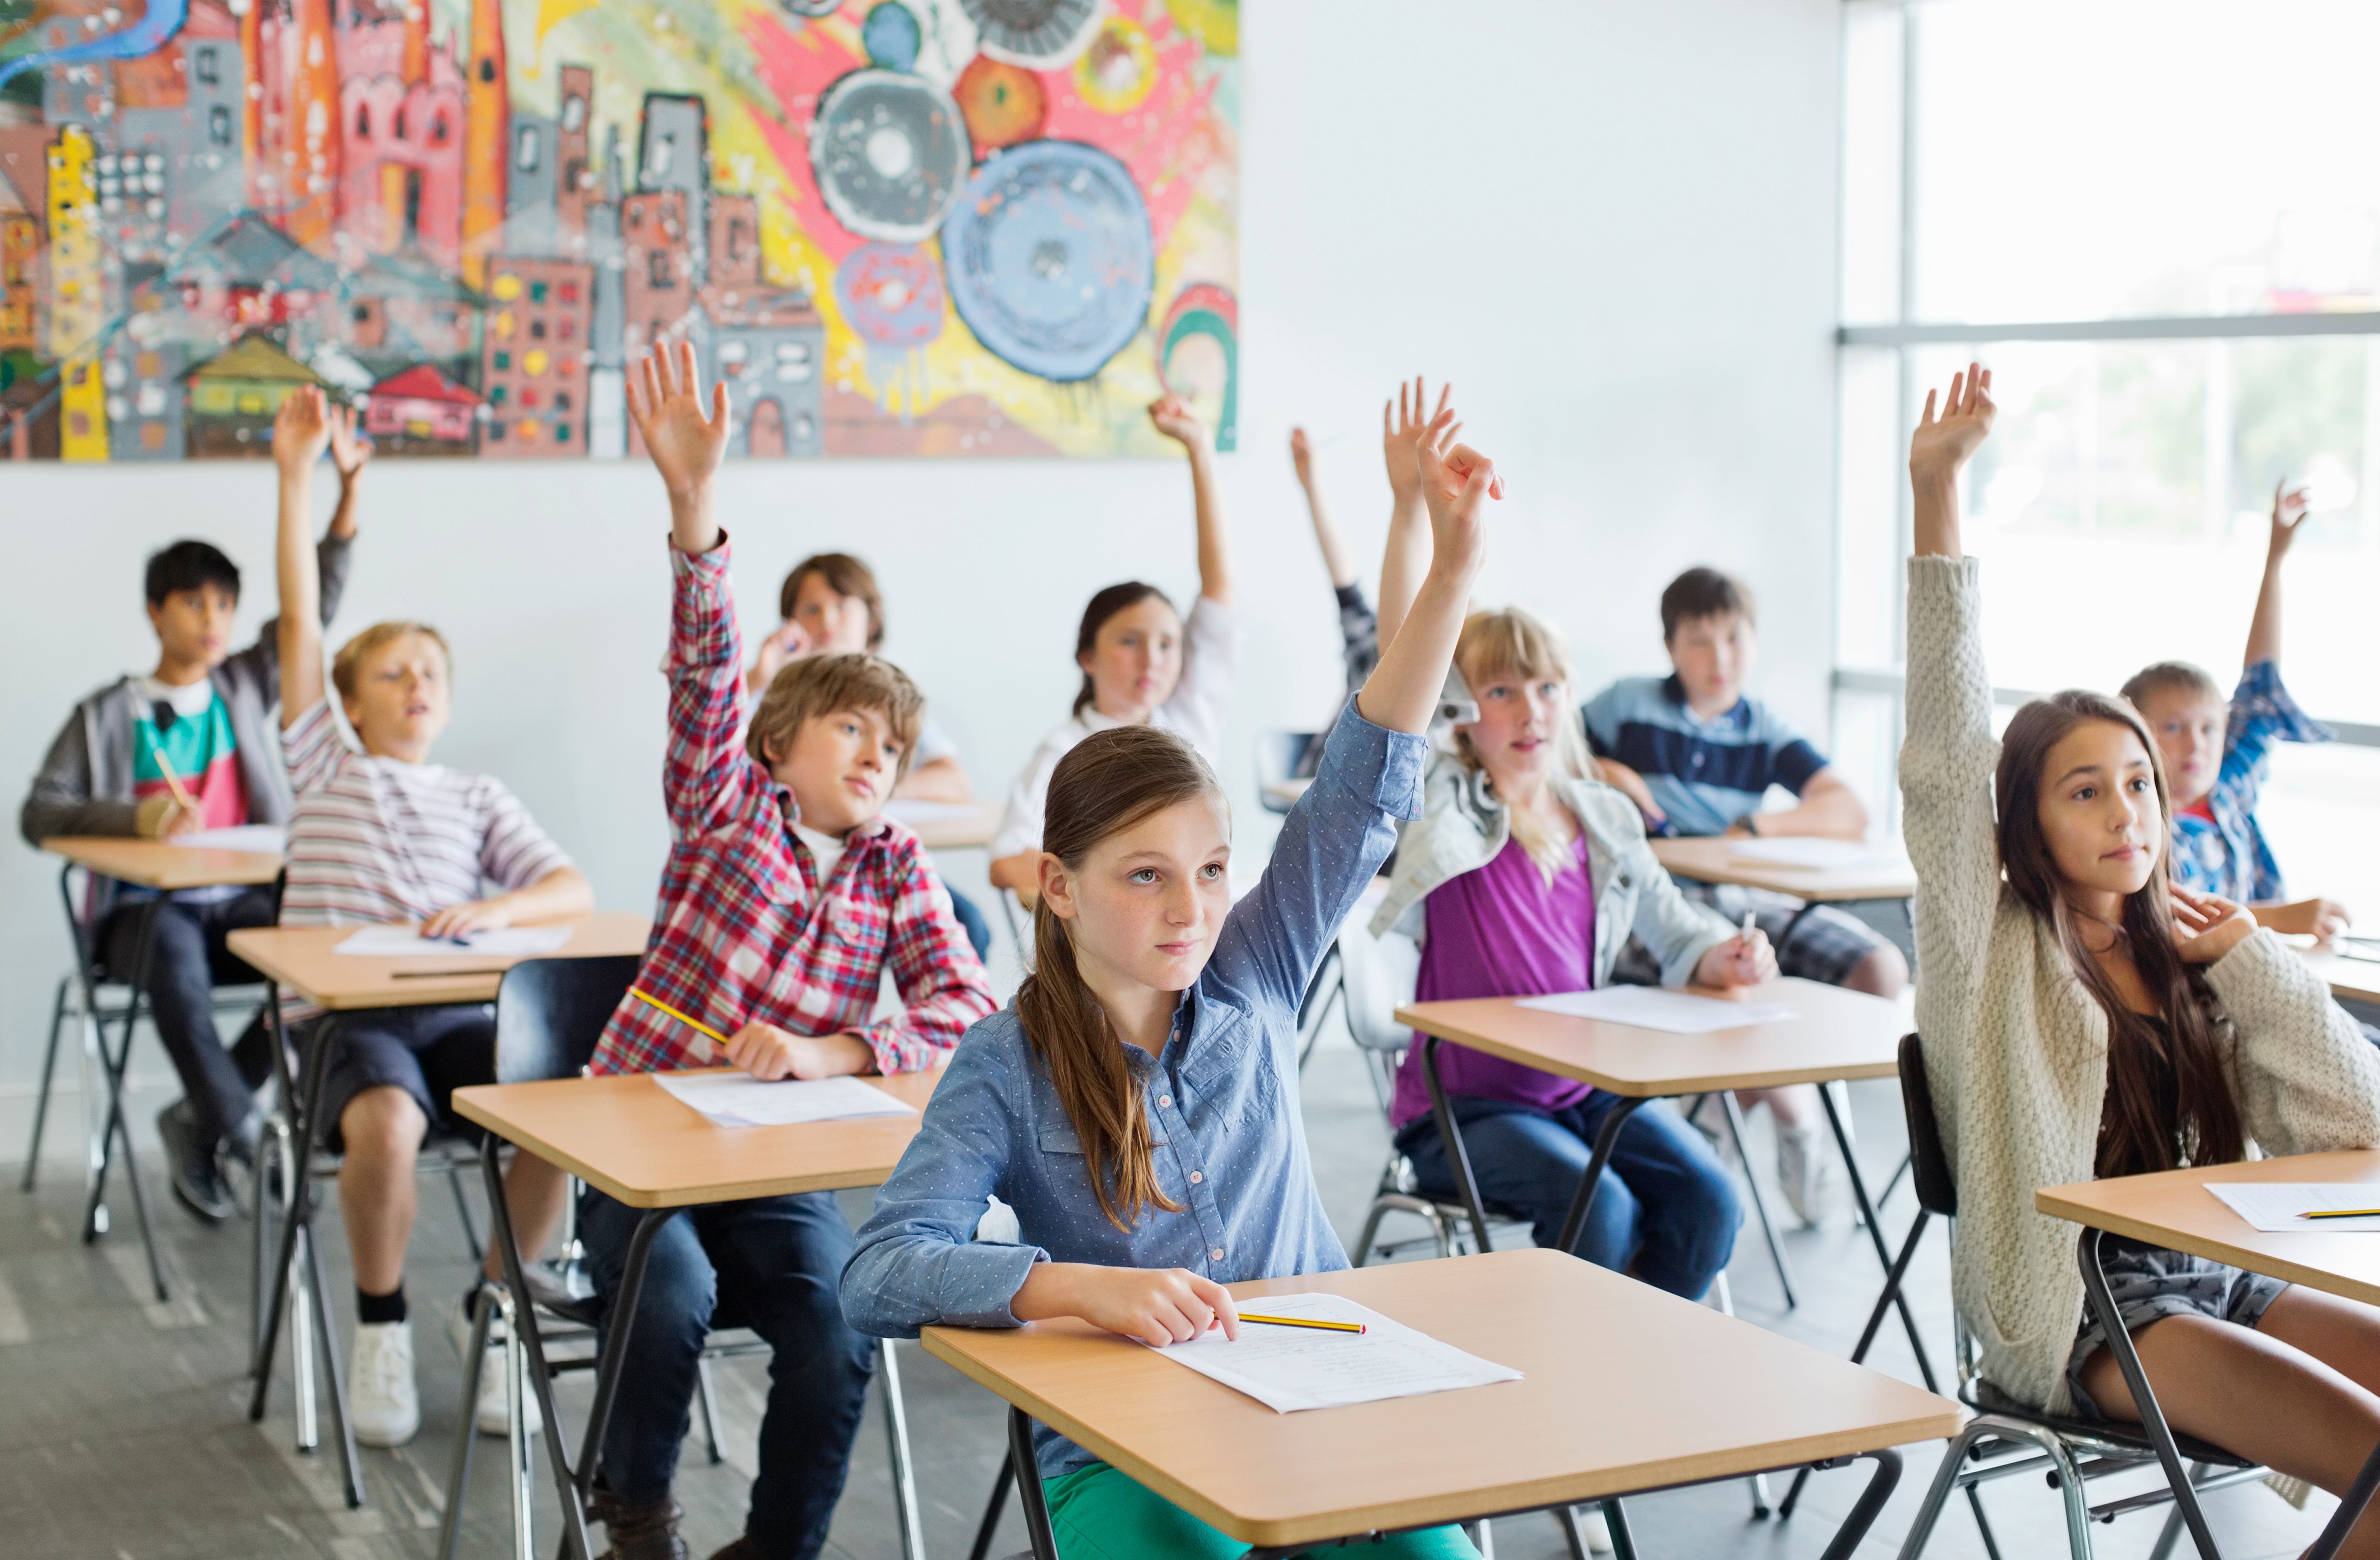 Students raising their hands in class. | Source: Getty Images